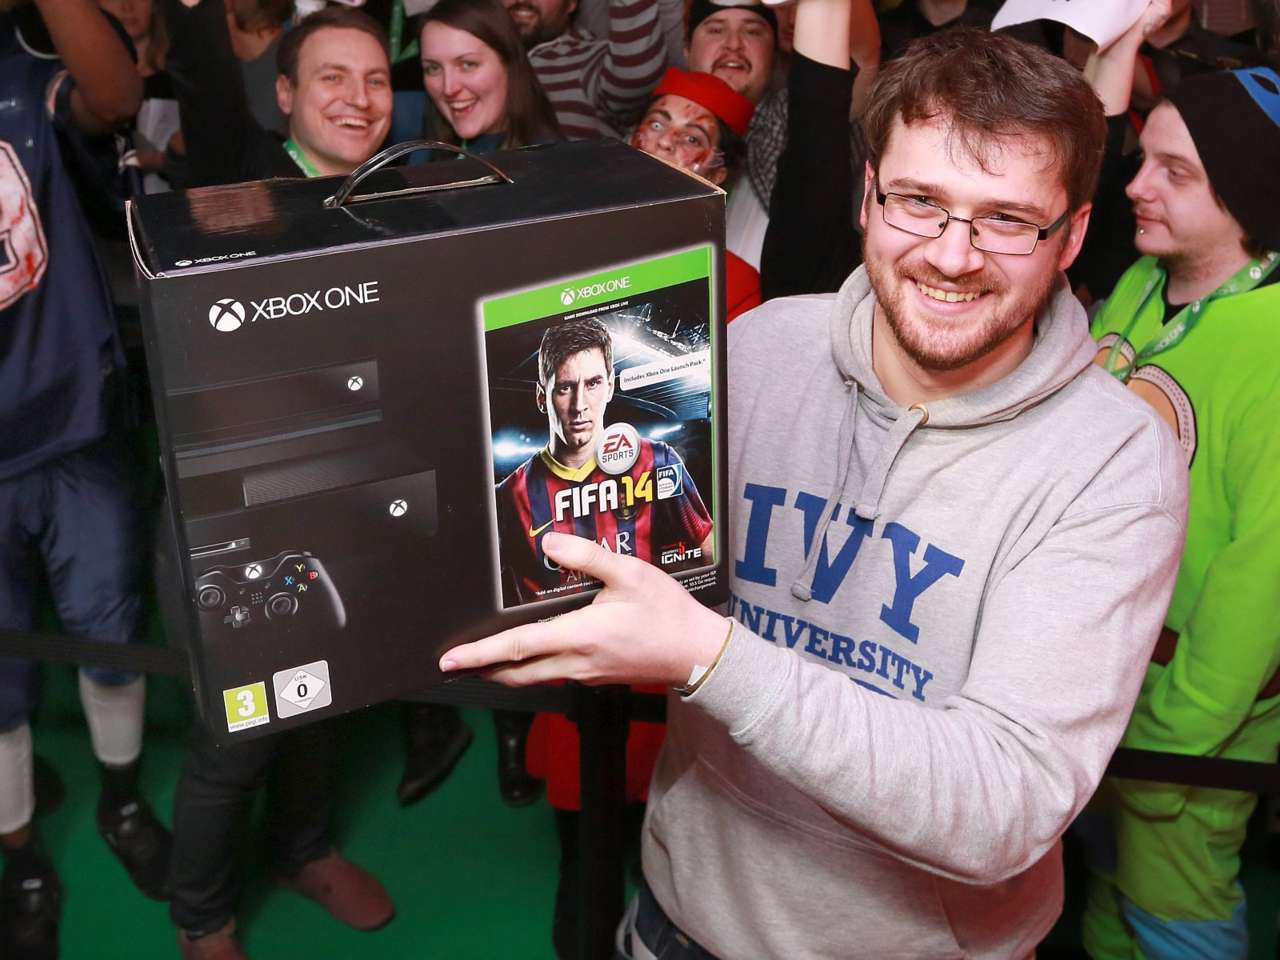 Charlie Pulbrook was the UK's first Xbox One owner. He spent £429.99 and only got a copy of FIFA 14.